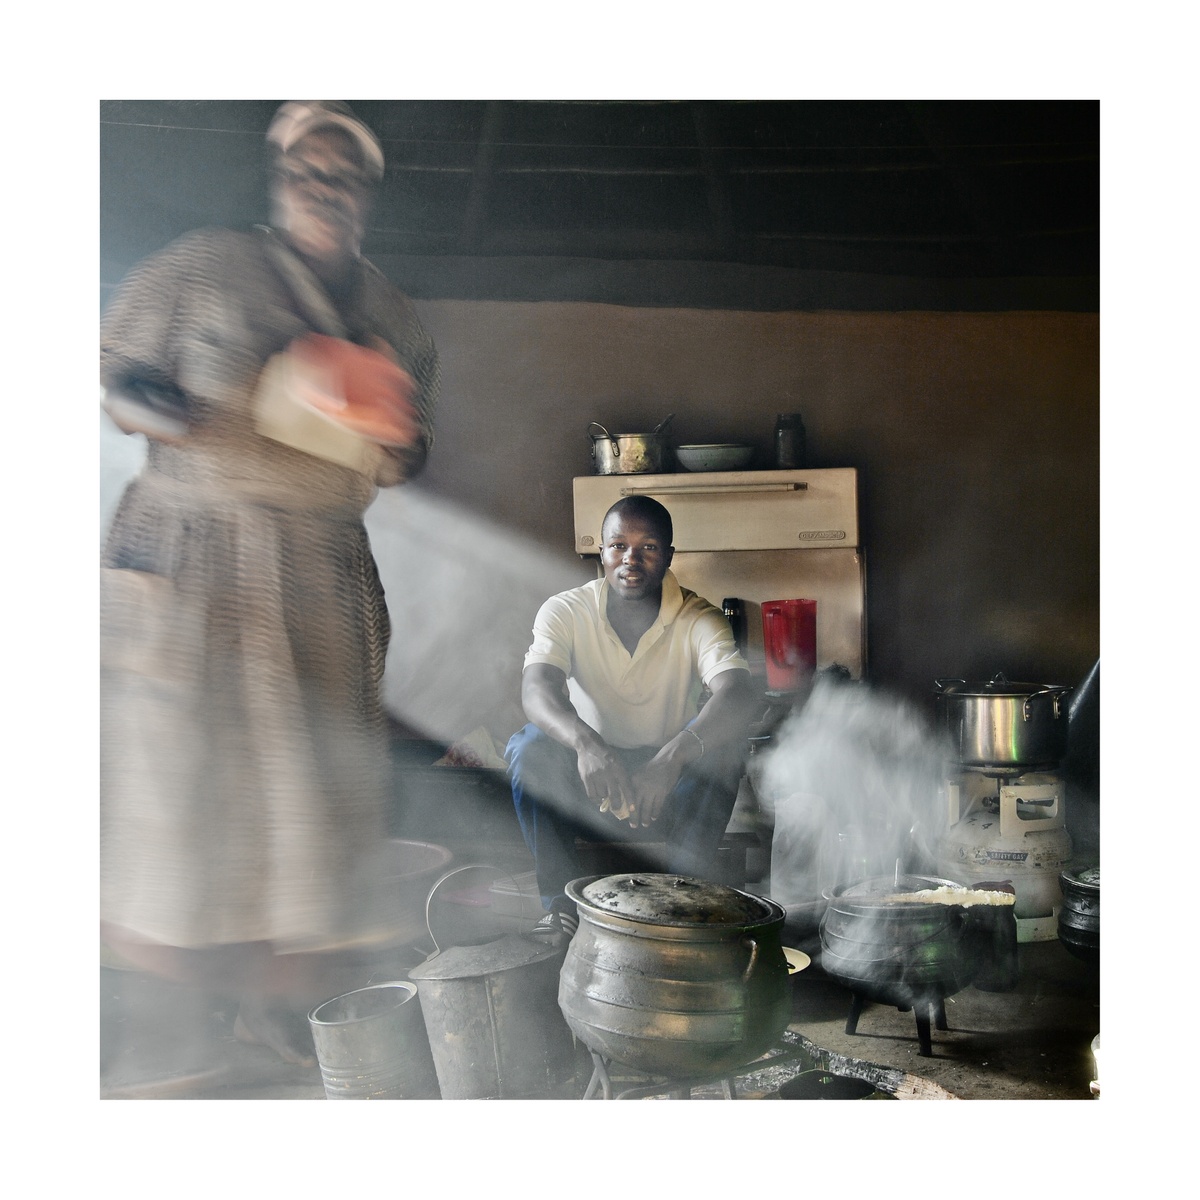 A photograph from Jabulani Dhlamini's residency on A4's top floor shows an indoor cooking area. At the back, one individual is seated. At the front, another individual stands tending various pots.
